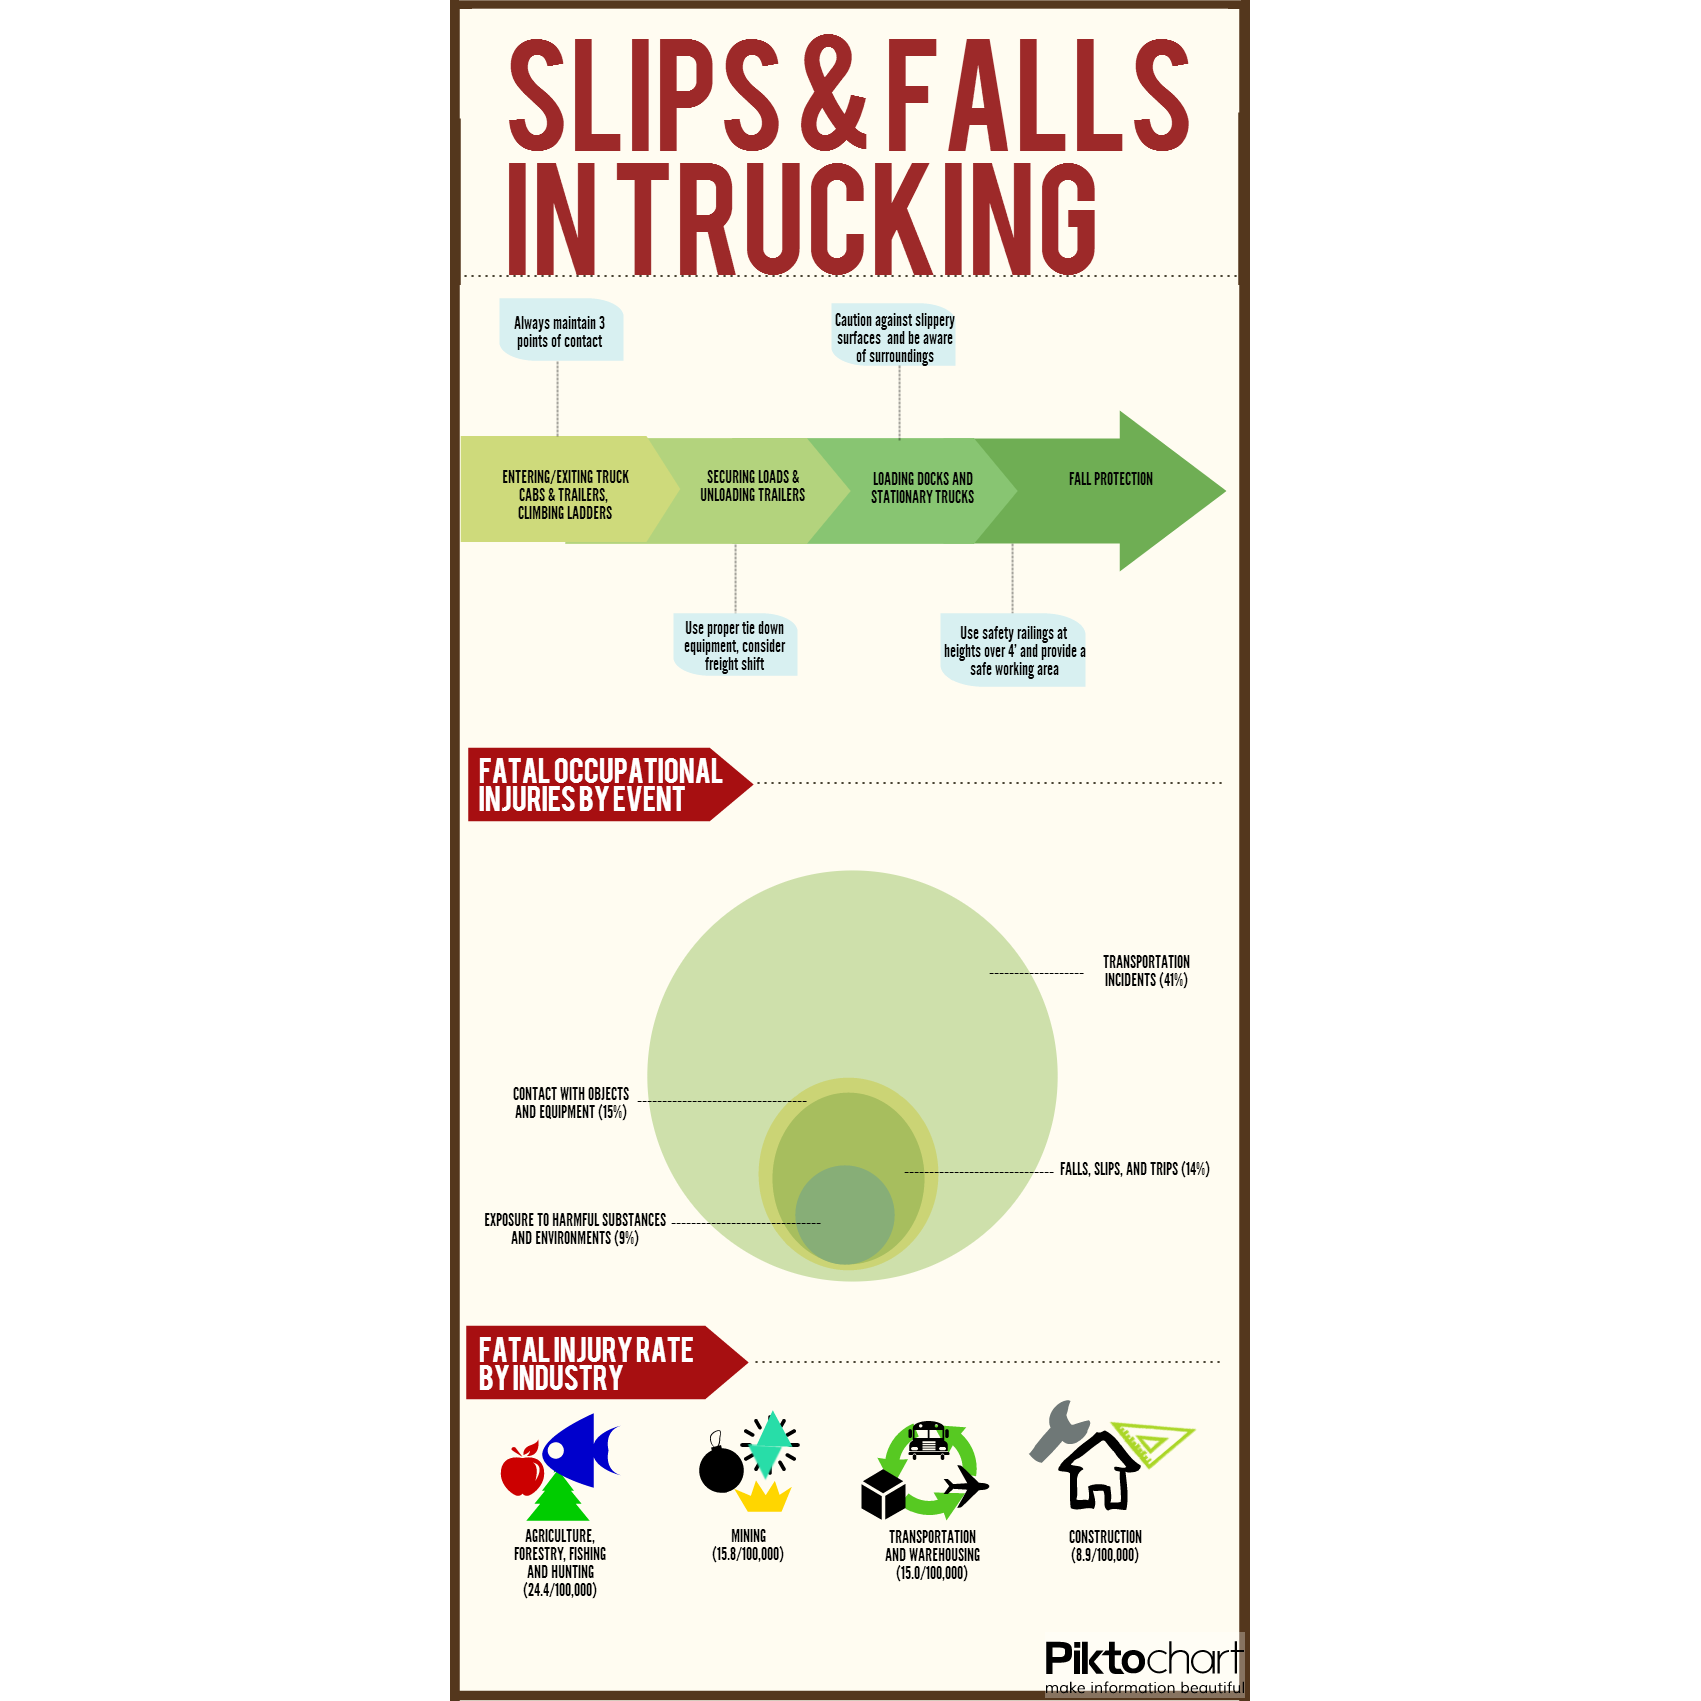 Slip & Fall Injuries in Truck Transportation [Infographic]